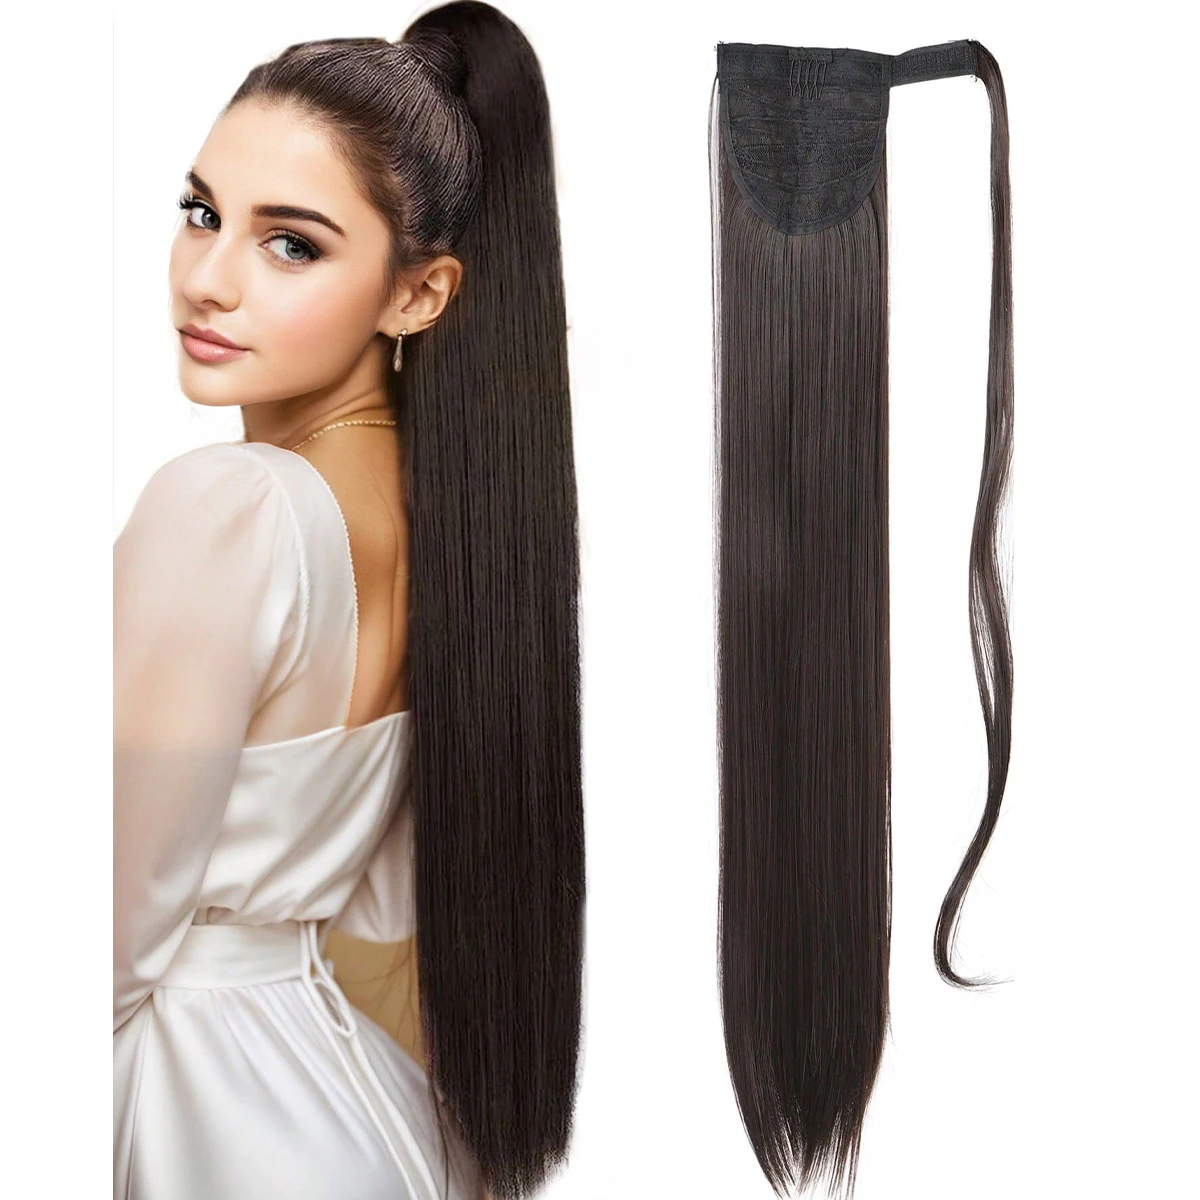 JINKAILI Long Straight Ponytail Extension Wrap Around Ponytail Heat Resistant Synthetic Pony Tail Hair Black Blonde Red Brown )